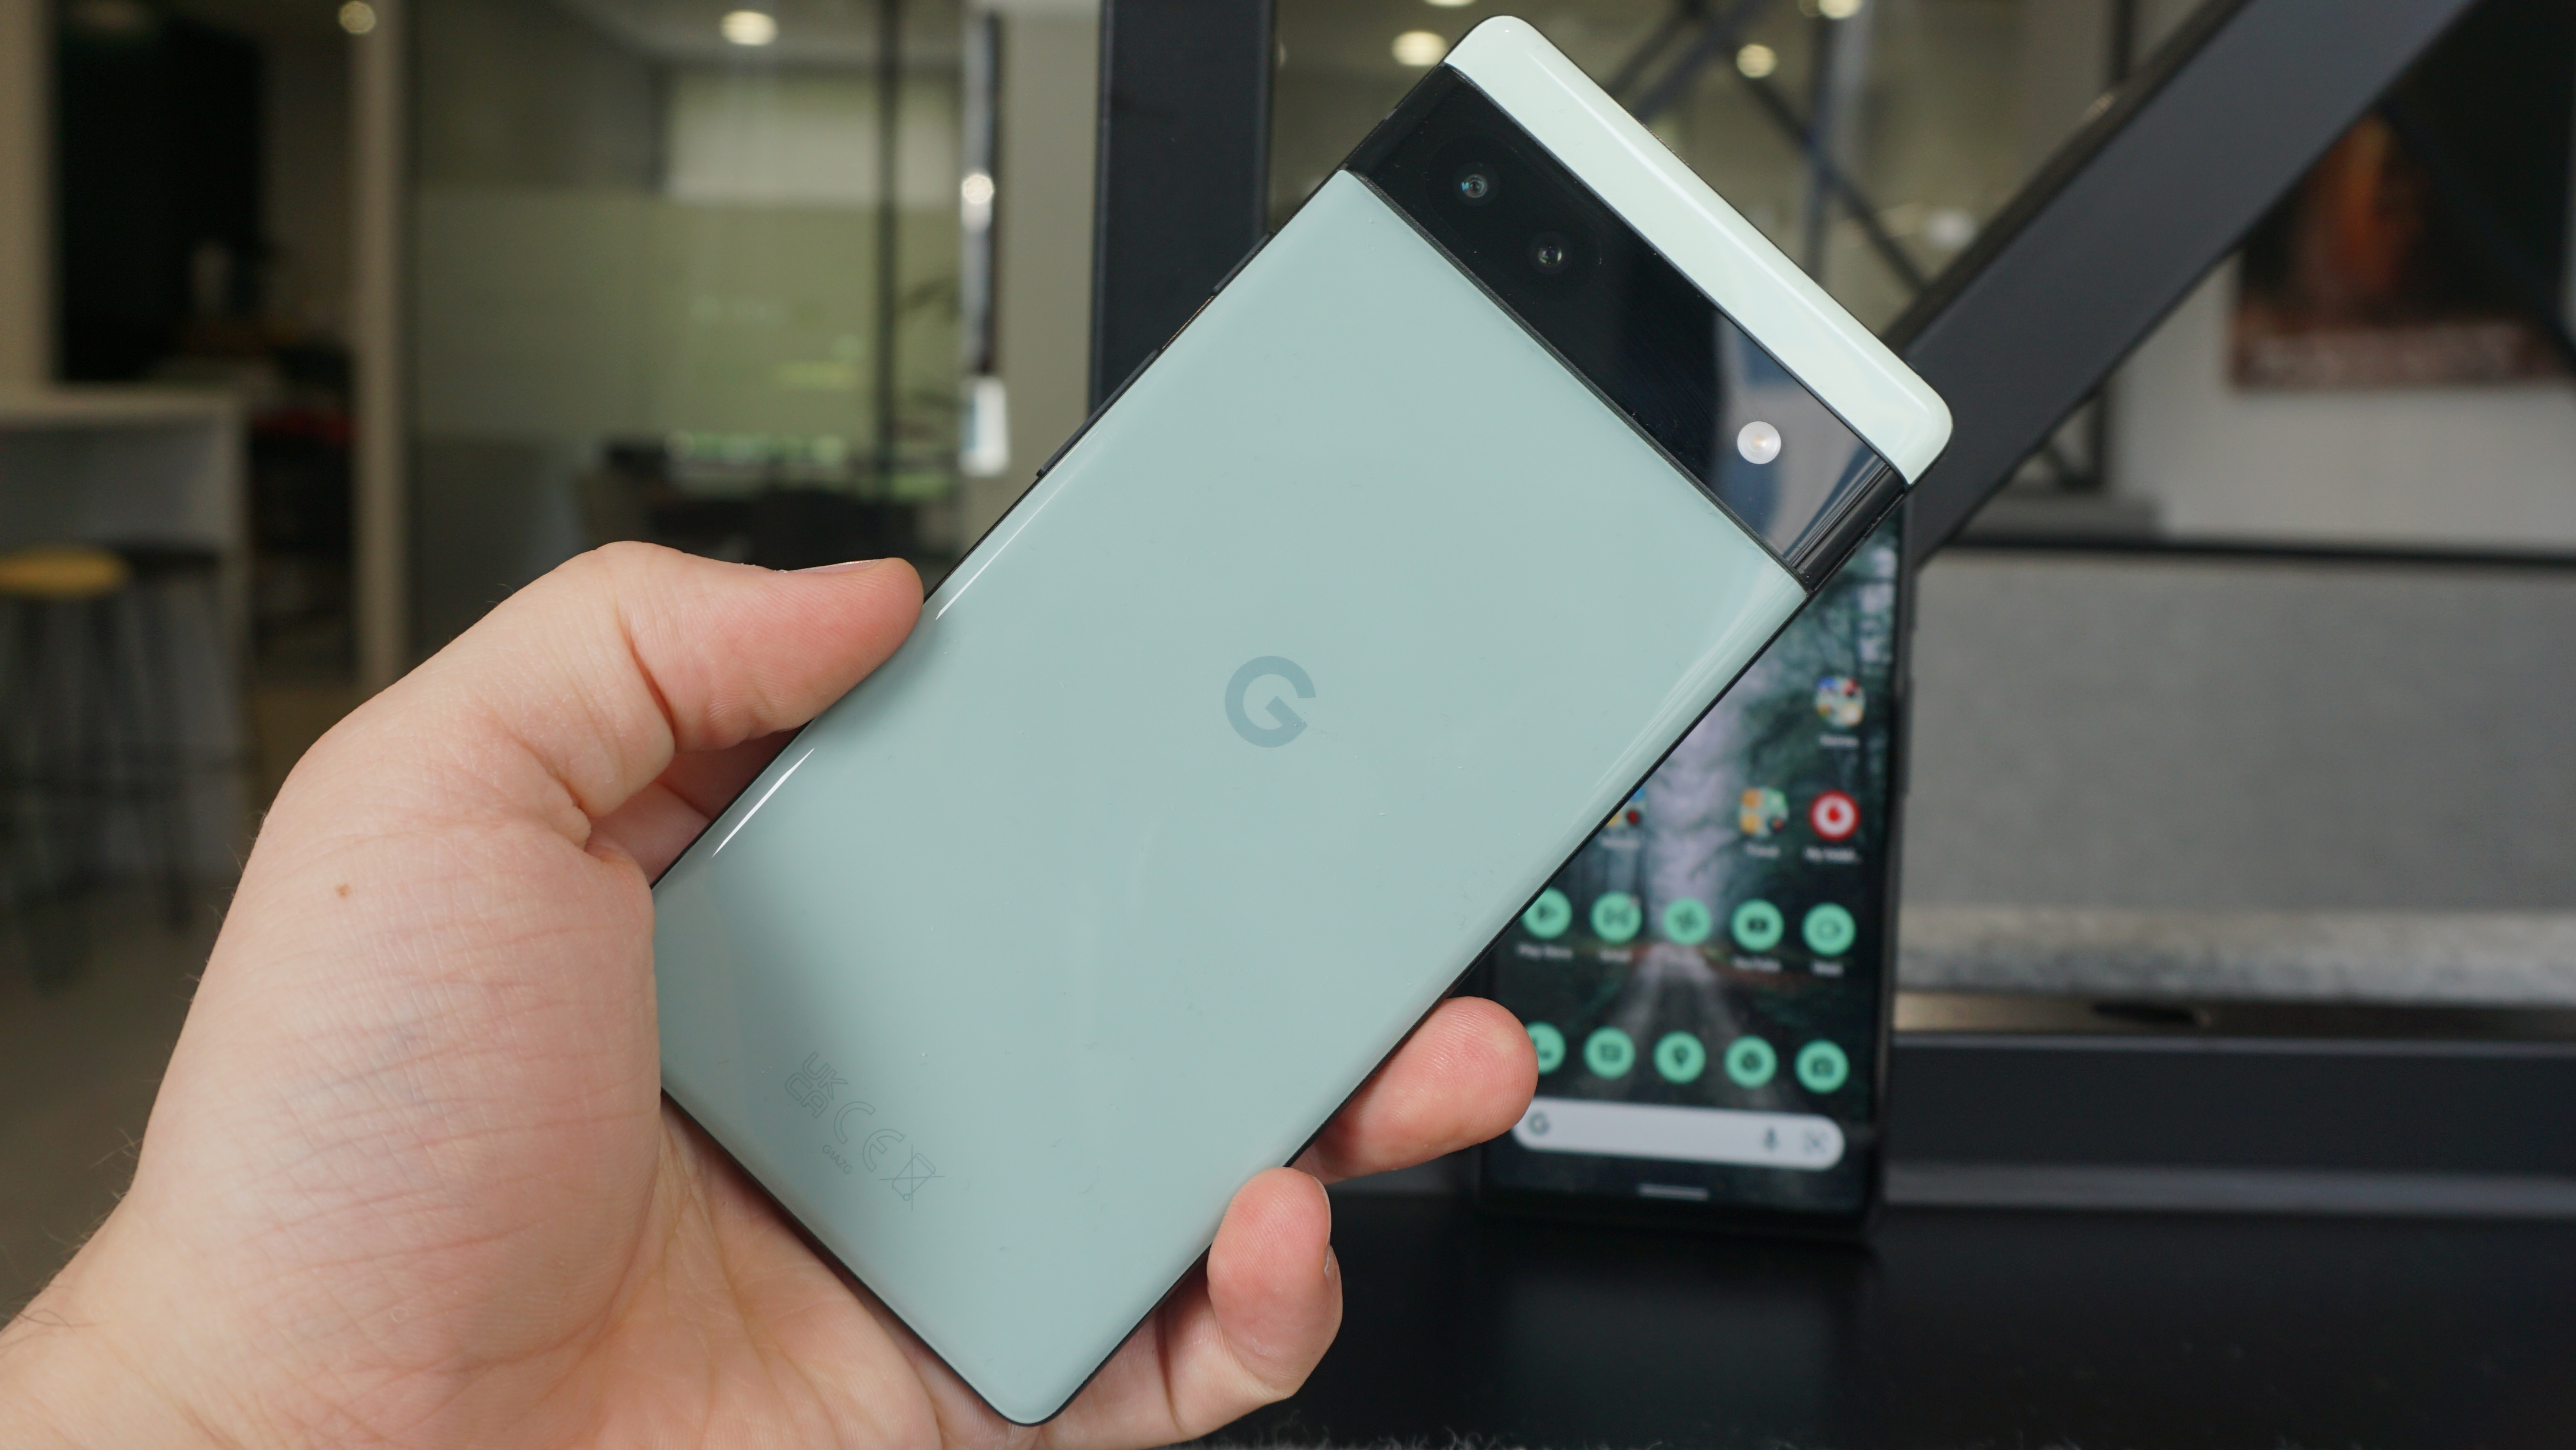 A Google Pixel 6a in someone's hand, from the back